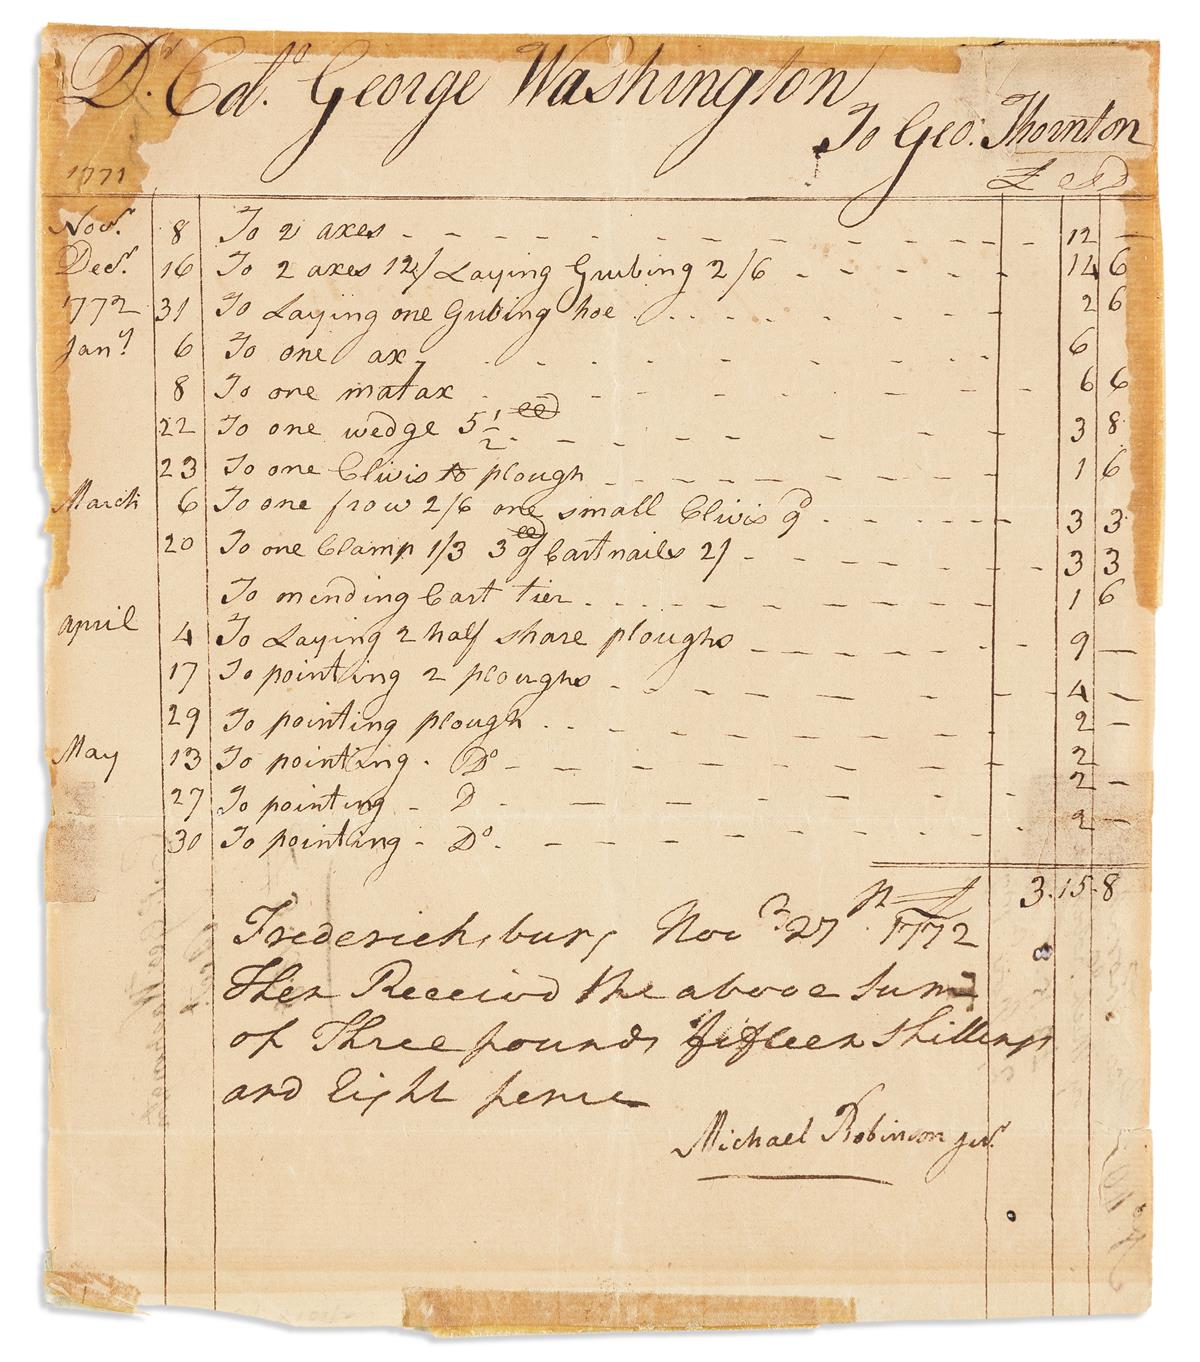 WASHINGTON, GEORGE. Autograph Manuscript, unsigned, 4 holograph lines recording payment of his debt to George Thornton